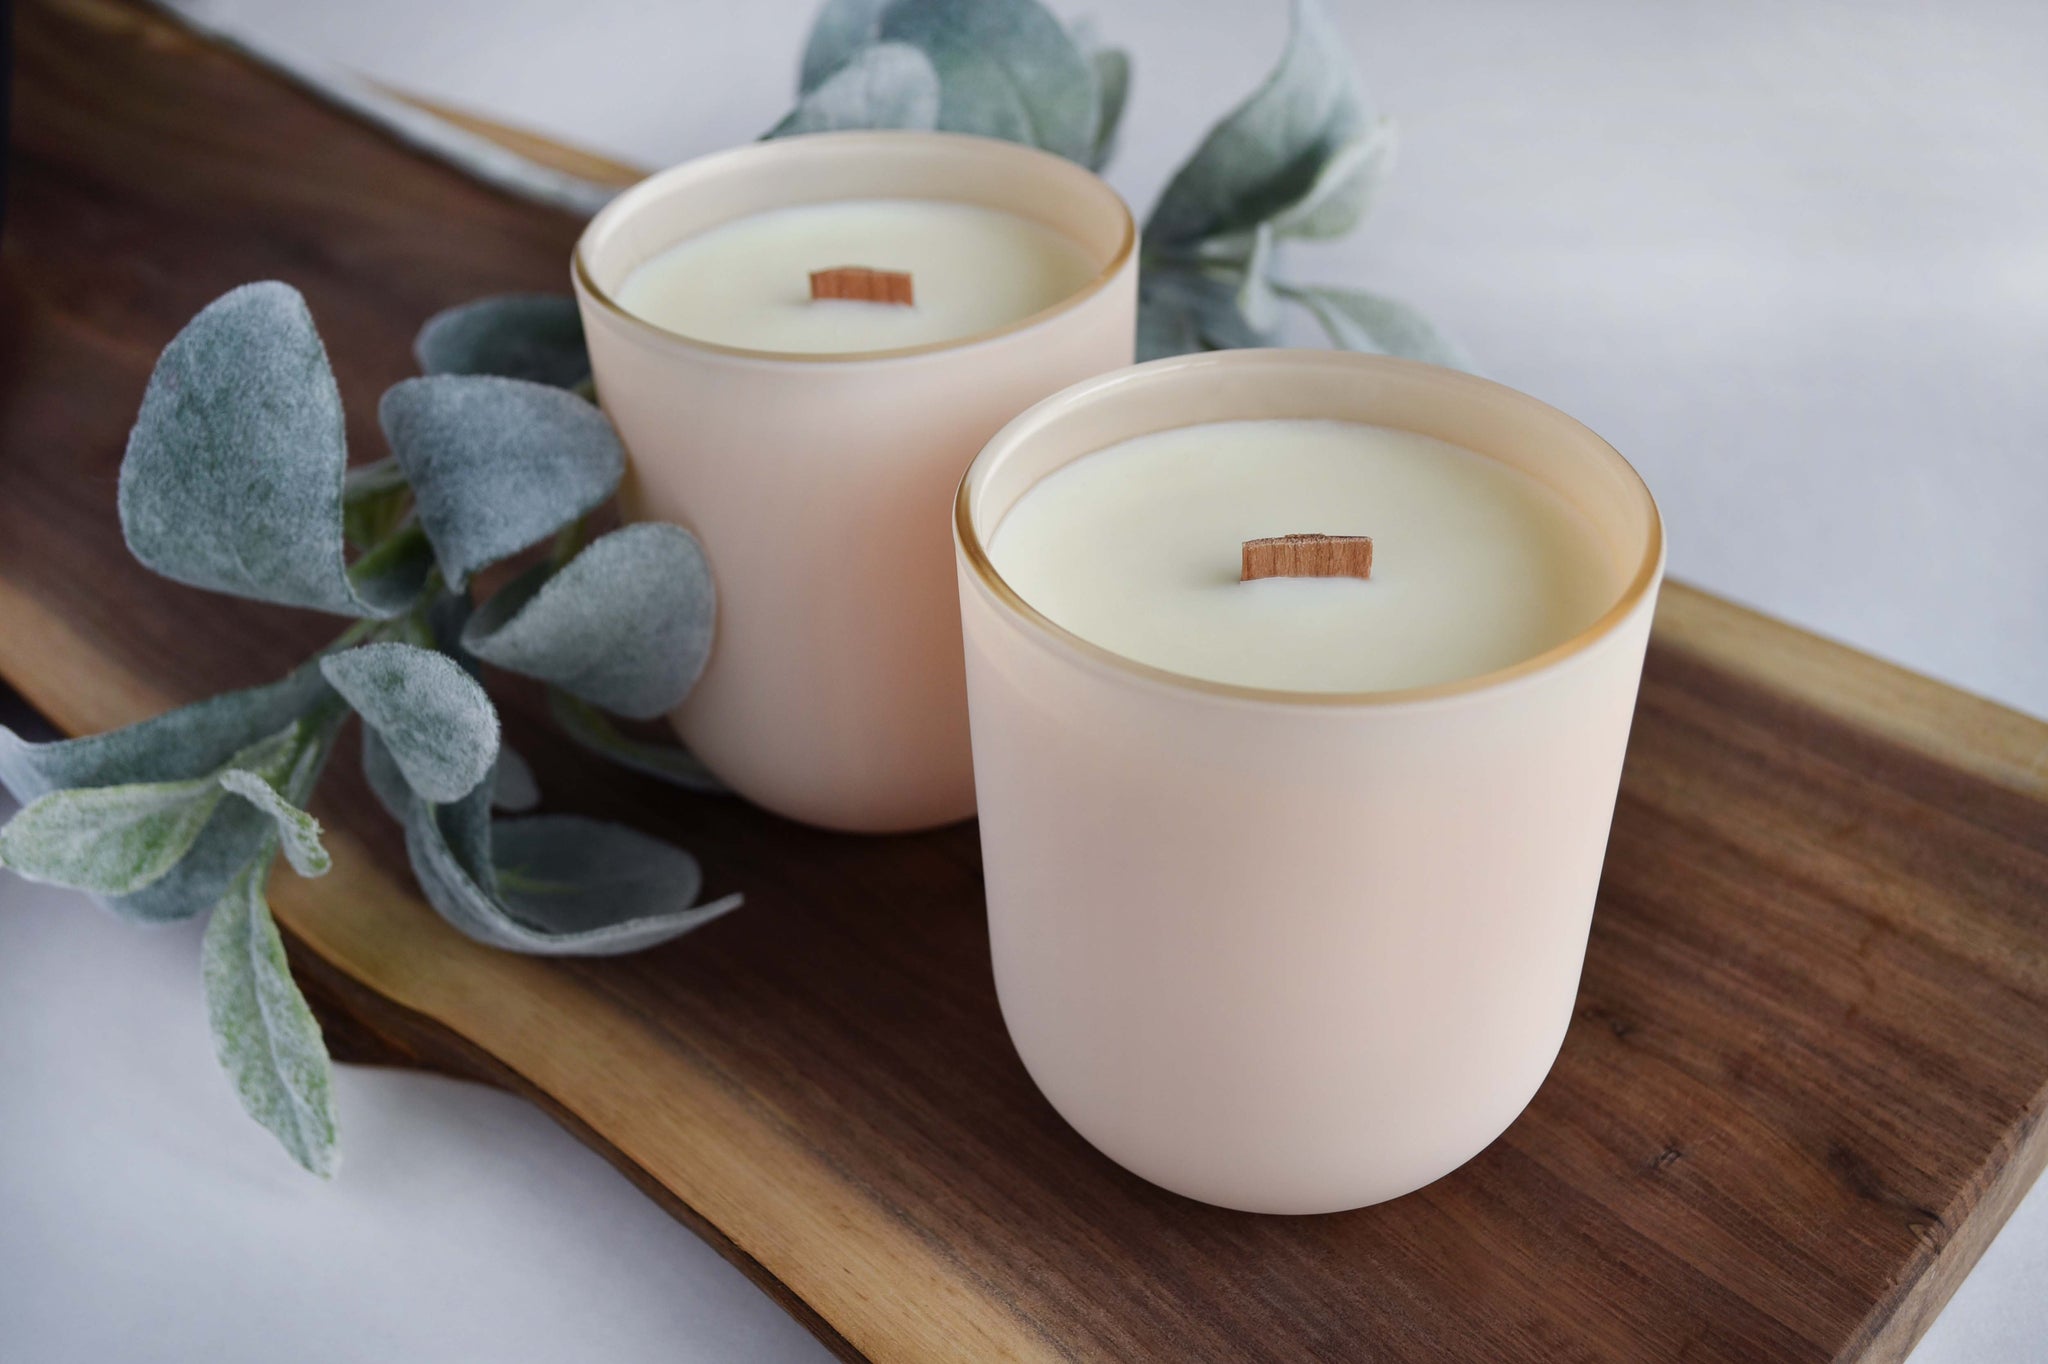 Crystal aromatherapy crackling wooden wick candles – The Magical Bee